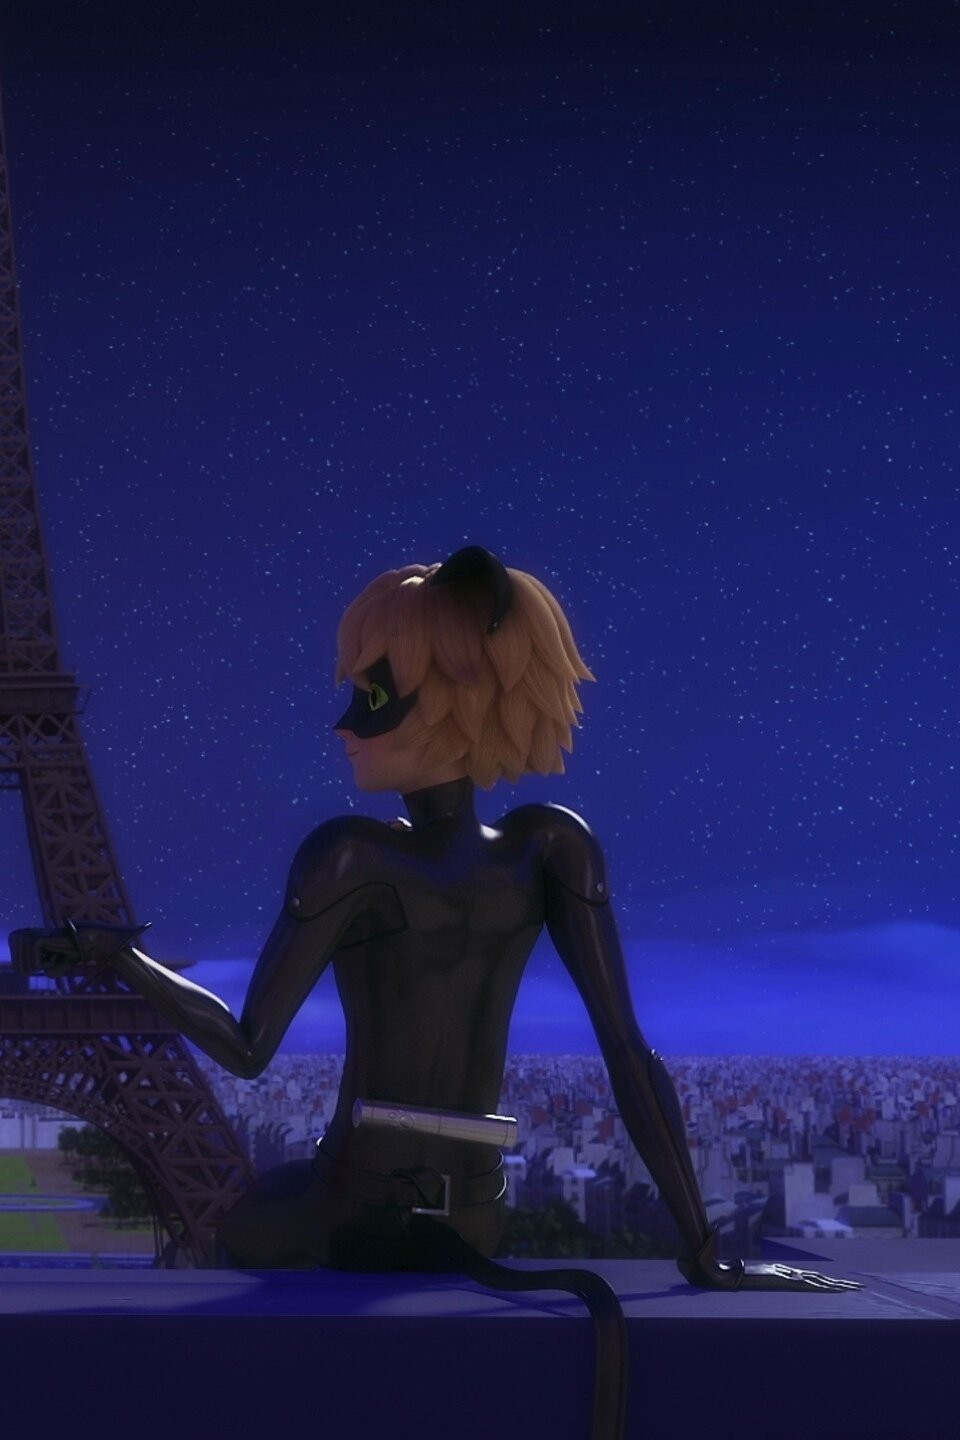 Miraculous: Tales of Ladybug and Cat Noir: Season 5, Episode 3 - Rotten  Tomatoes